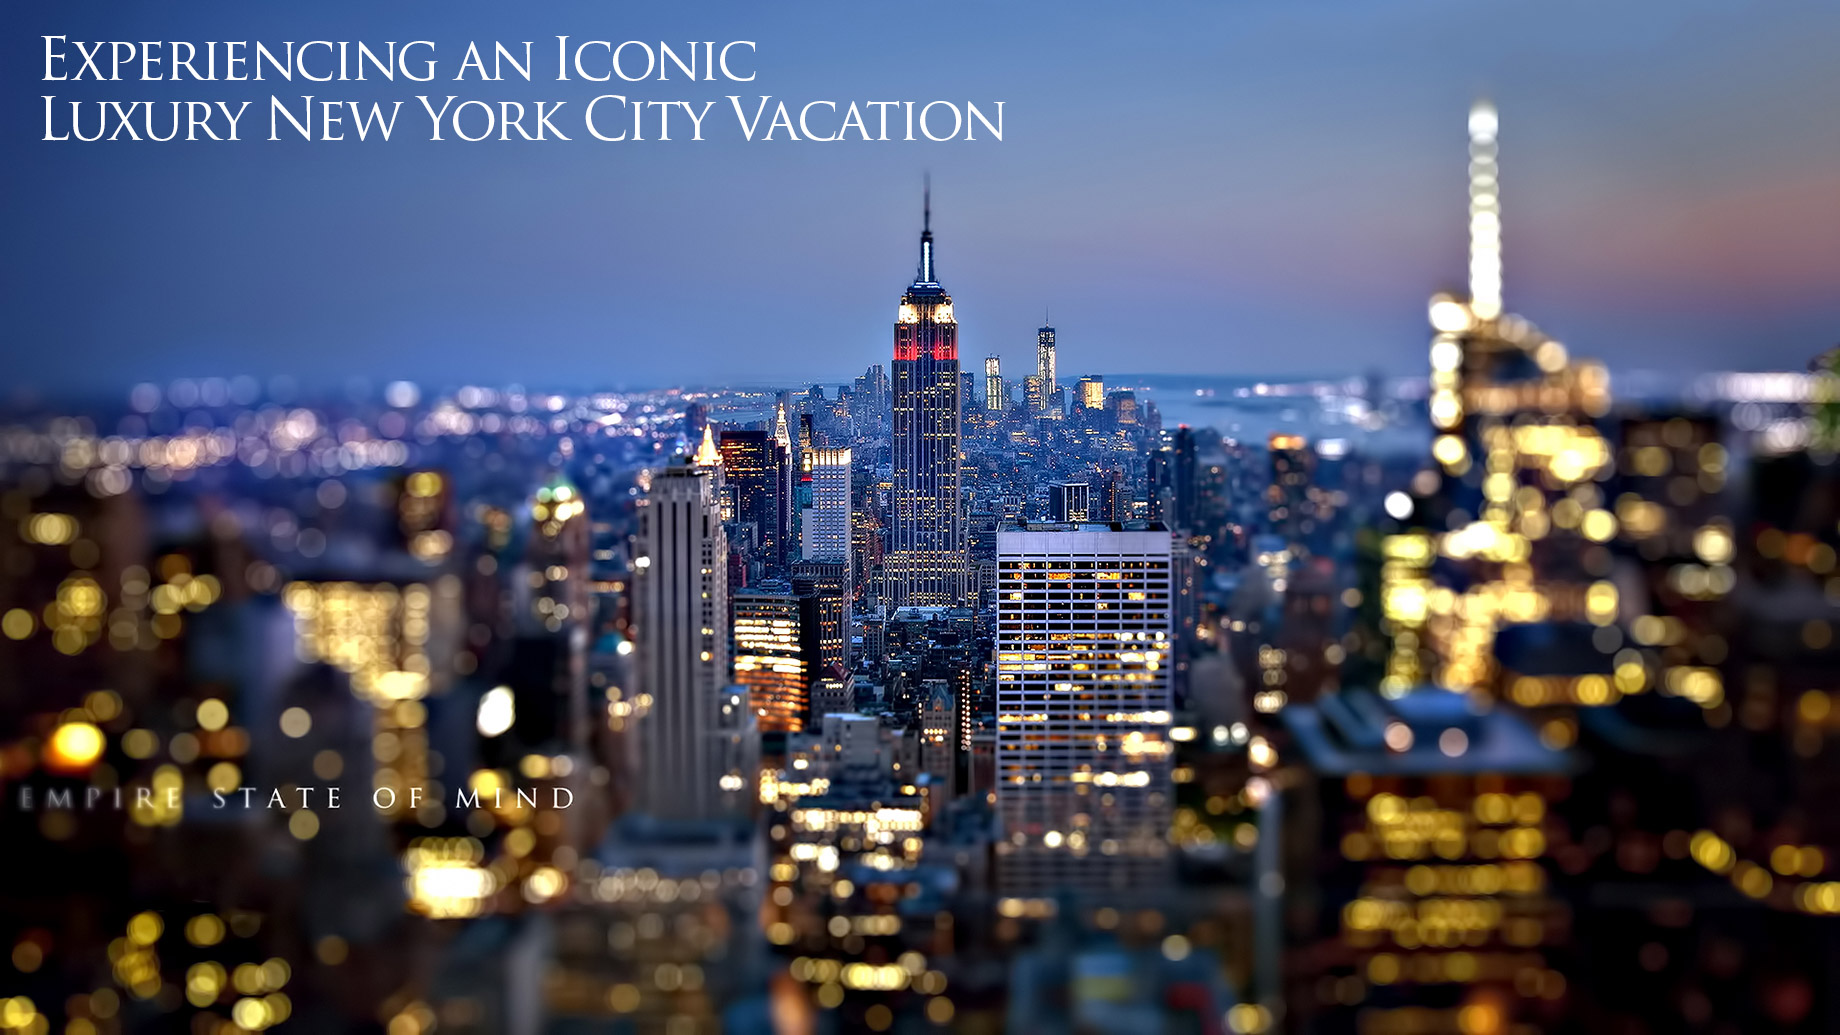 Empire State of Mind - Experiencing an Iconic Luxury New York City Vacation